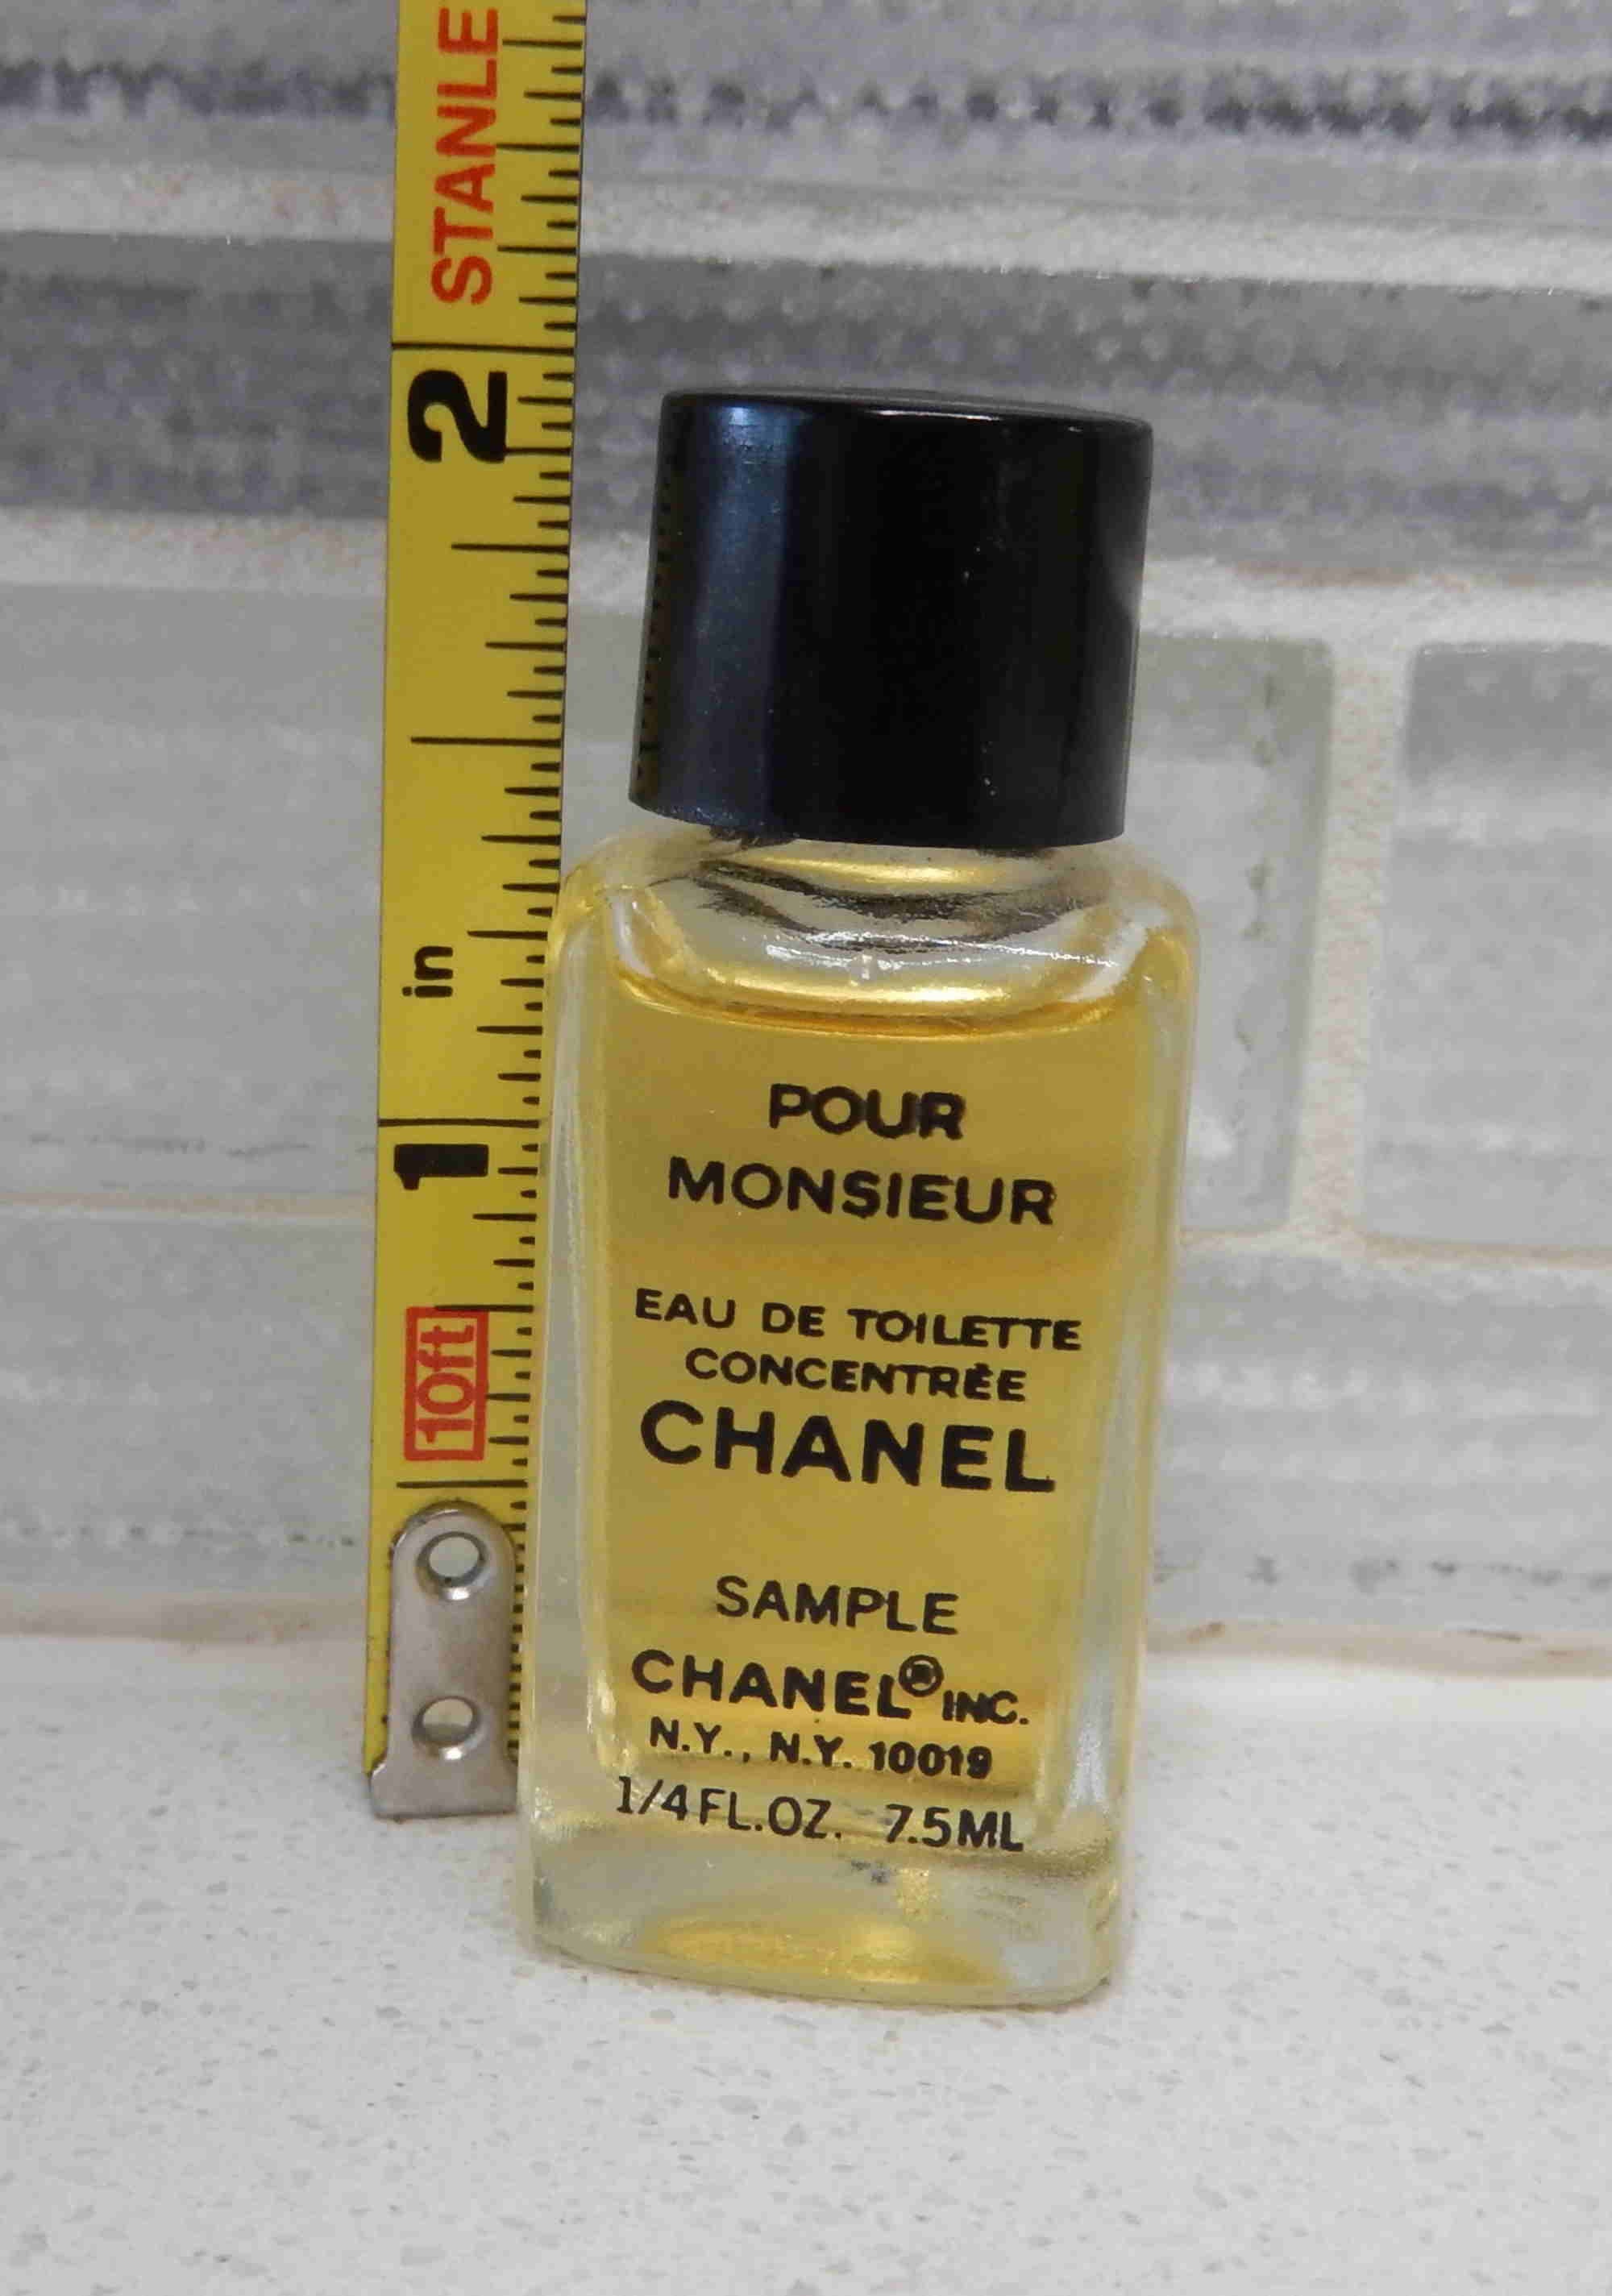 Chanel Pour Monsieur EDT Large Sample 1/4 Ox 7.5 Ml. -  India